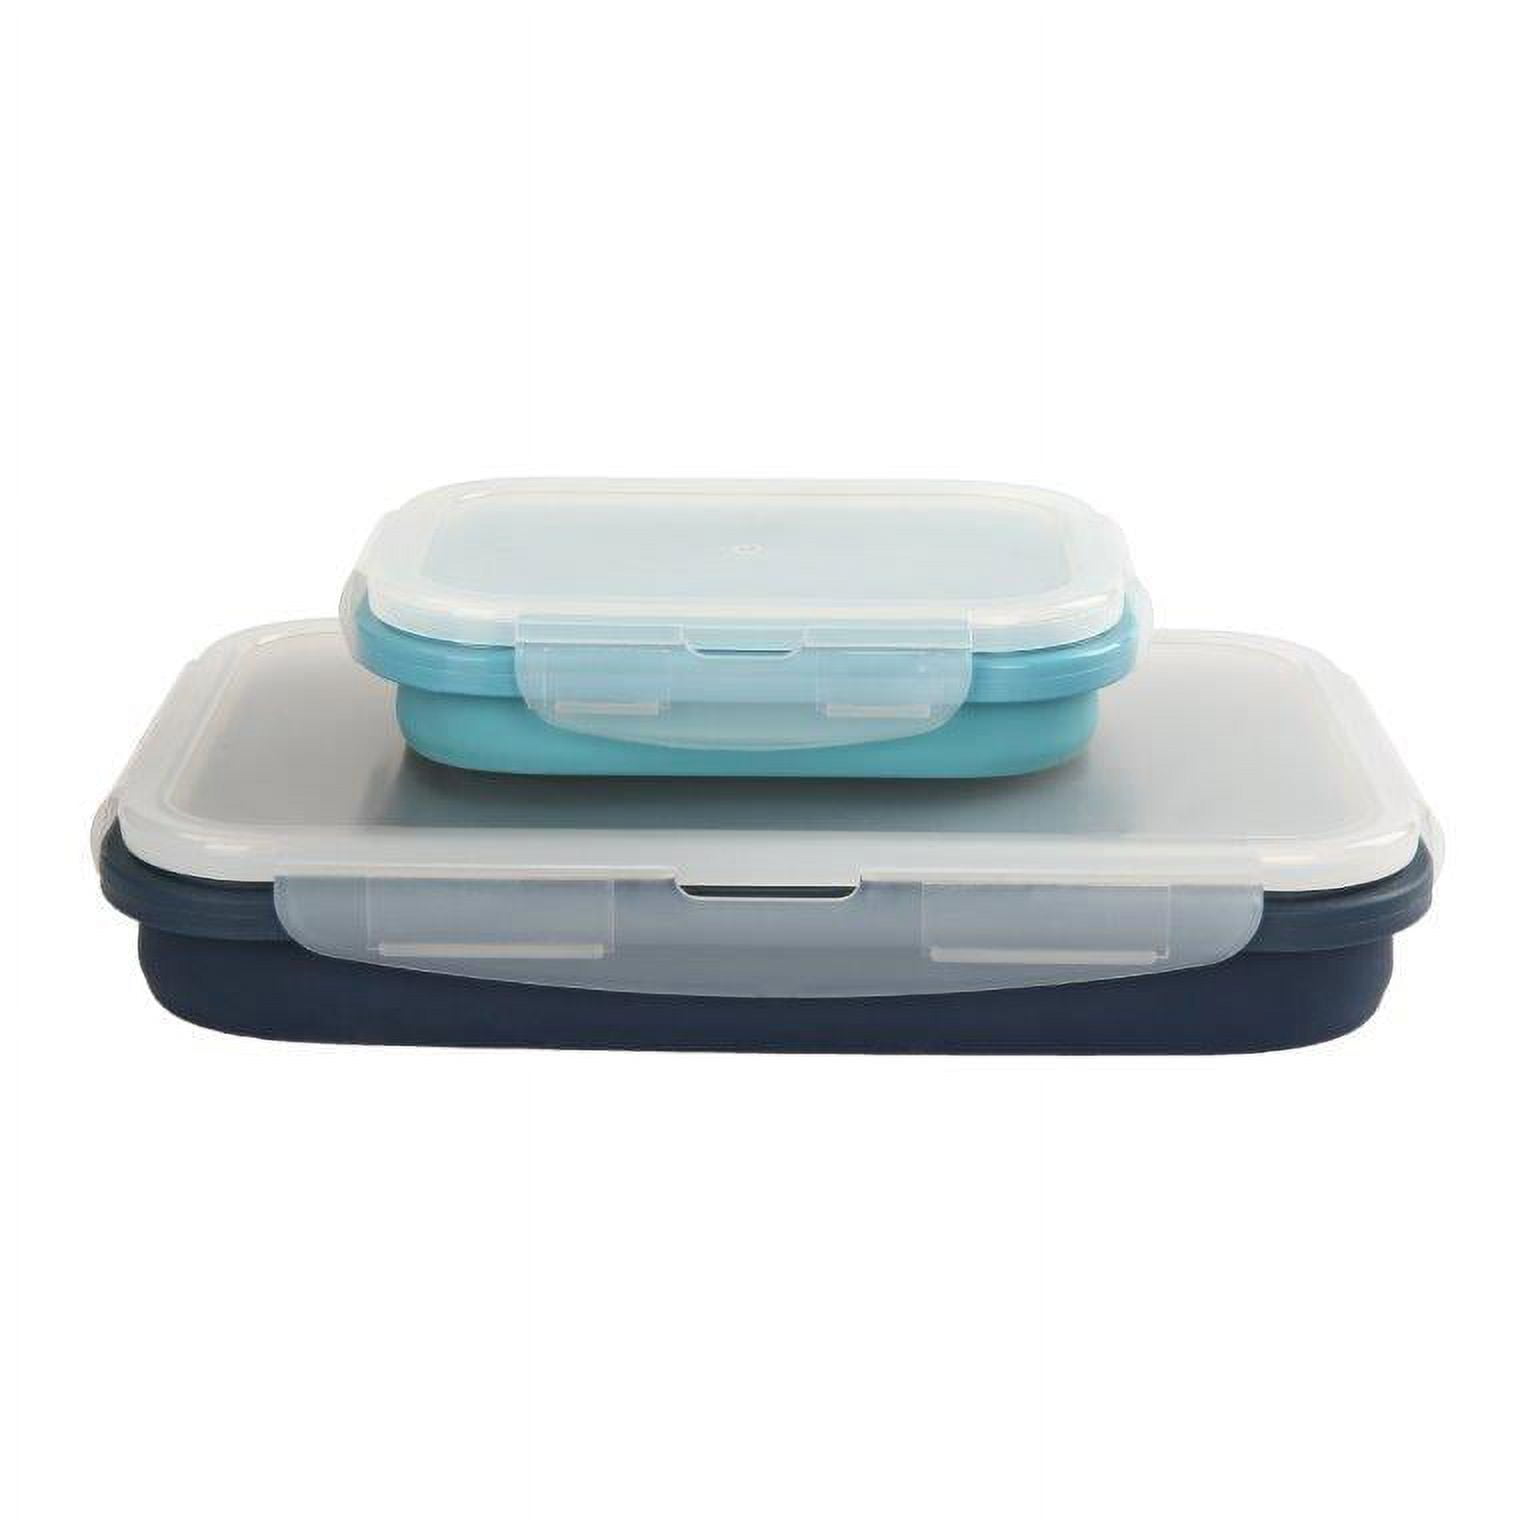  Collapsible Two-Section Food Container 121305